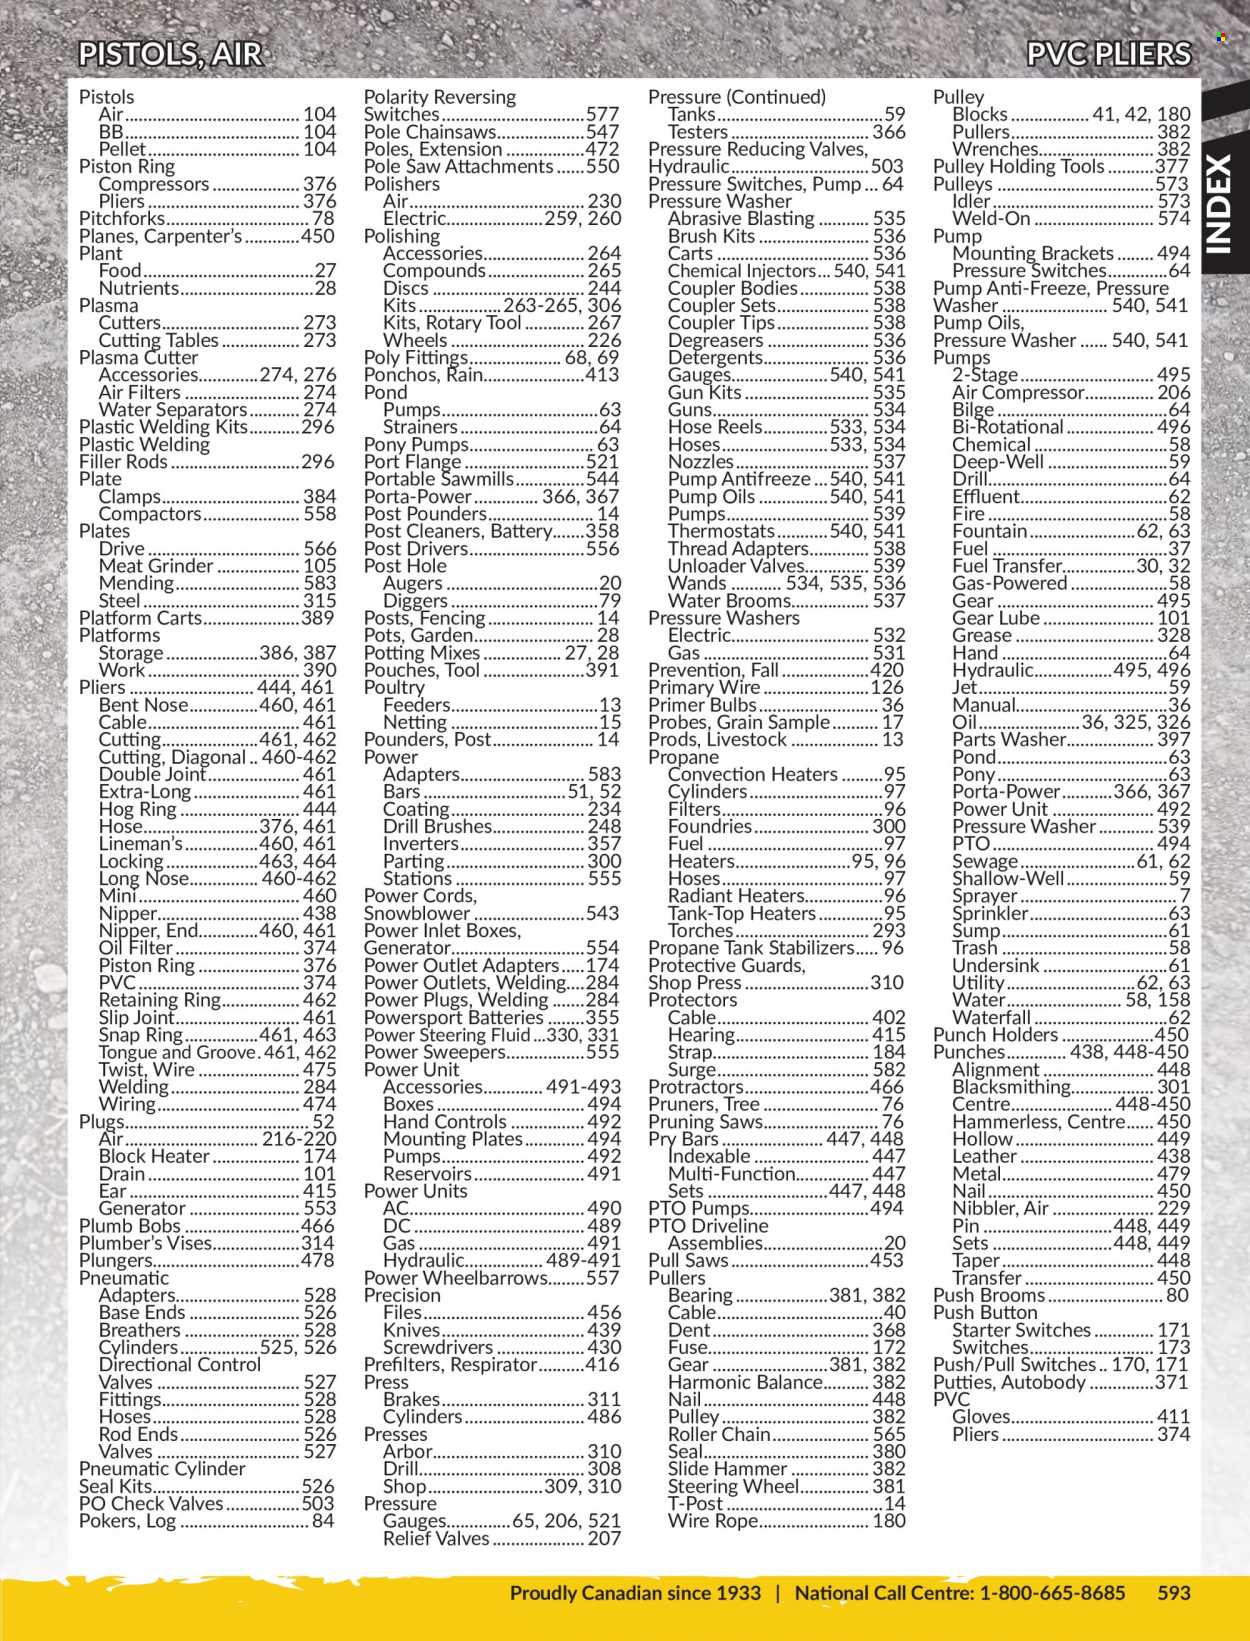 thumbnail - Princess Auto Flyer - Sales products - roller, surge, tank, drill, hammer, wrench, grinder, saw, plasma cutter, snow blower, pliers, air compressor, knife, respirator, table, propane tank, pressure washer, generator, pot, sprayer, strap, oil filter, battery, starter, antifreeze, steering fluid. Page 597.